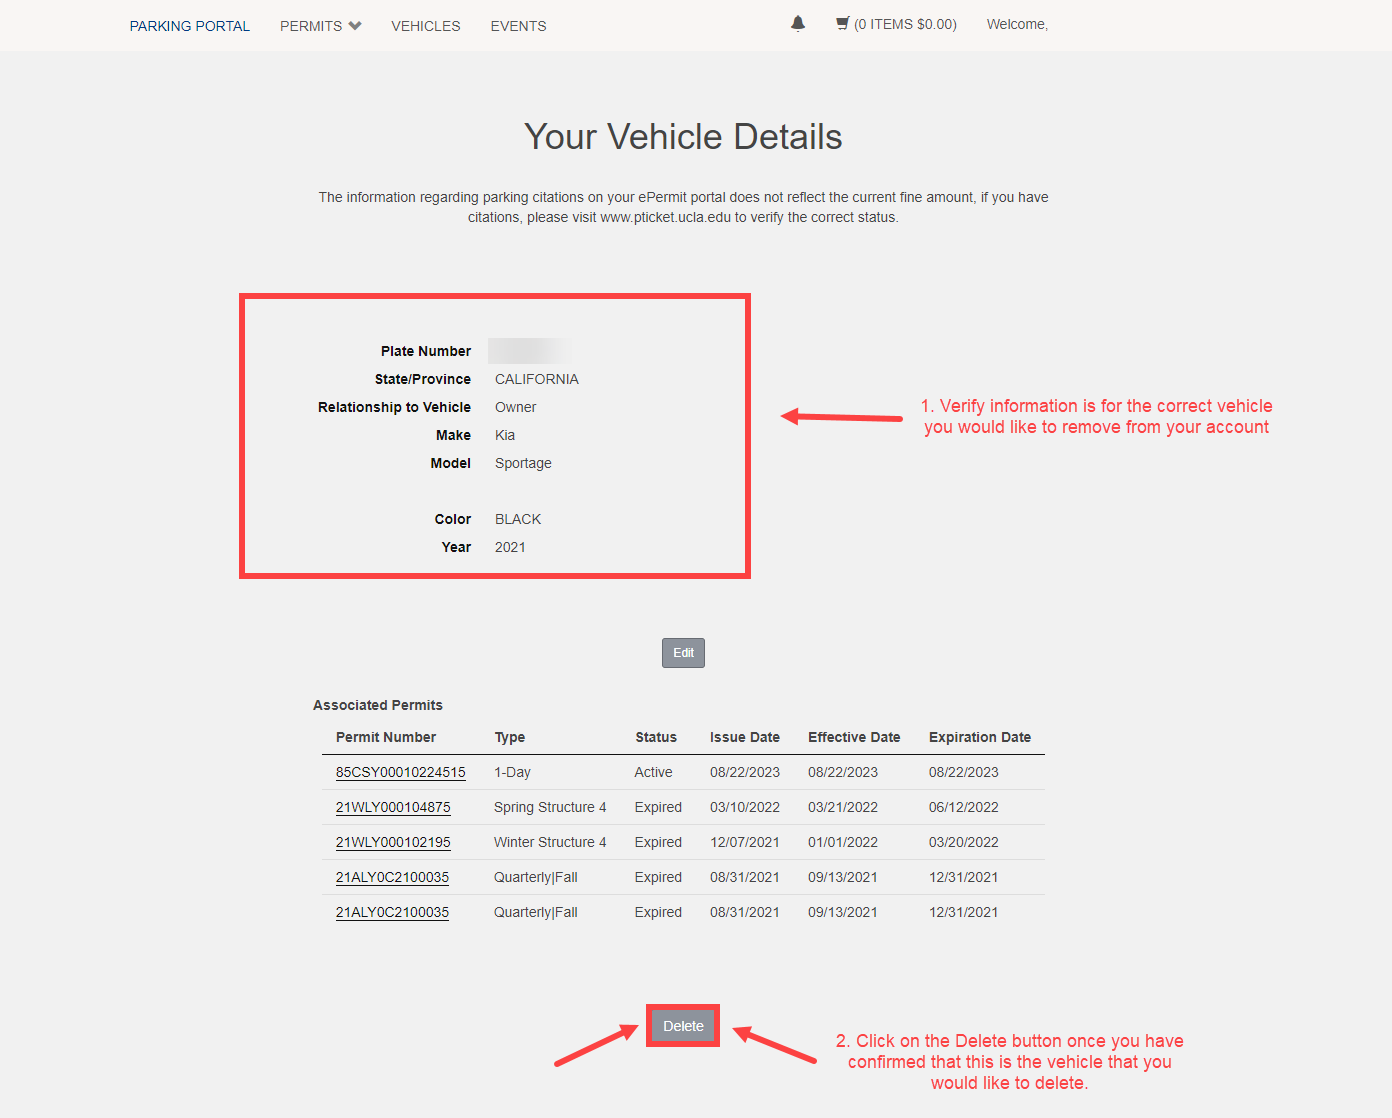 Removing a Vehicle from an ePermit Account